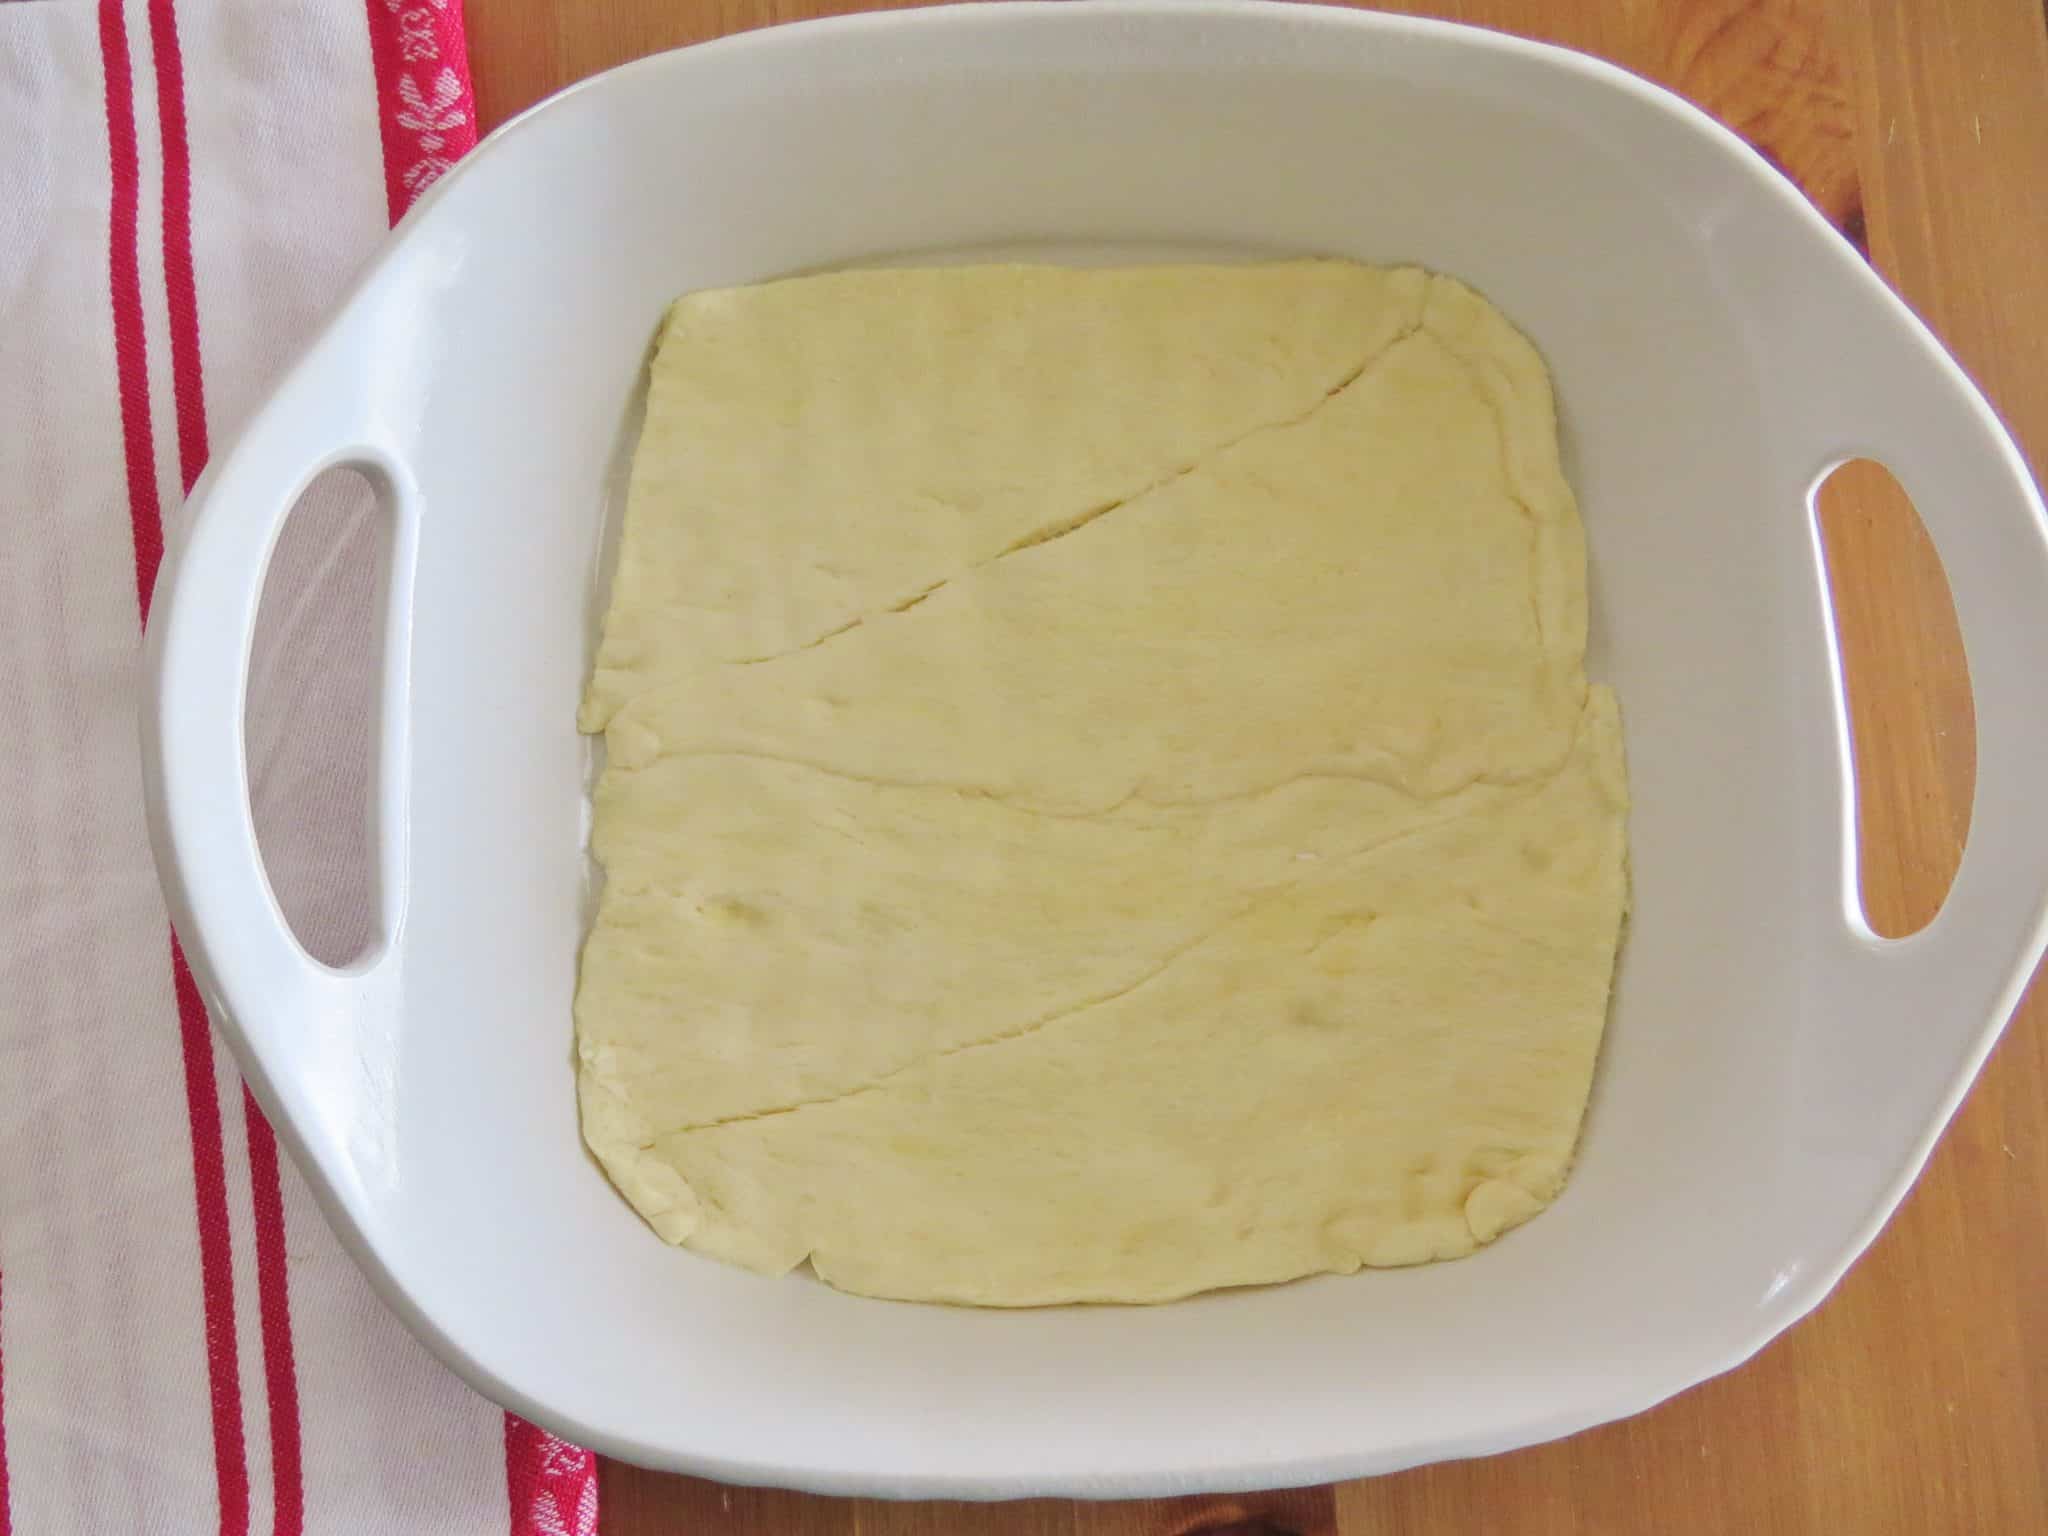 crescent roll dough spread into the bottom of a white baking dish.